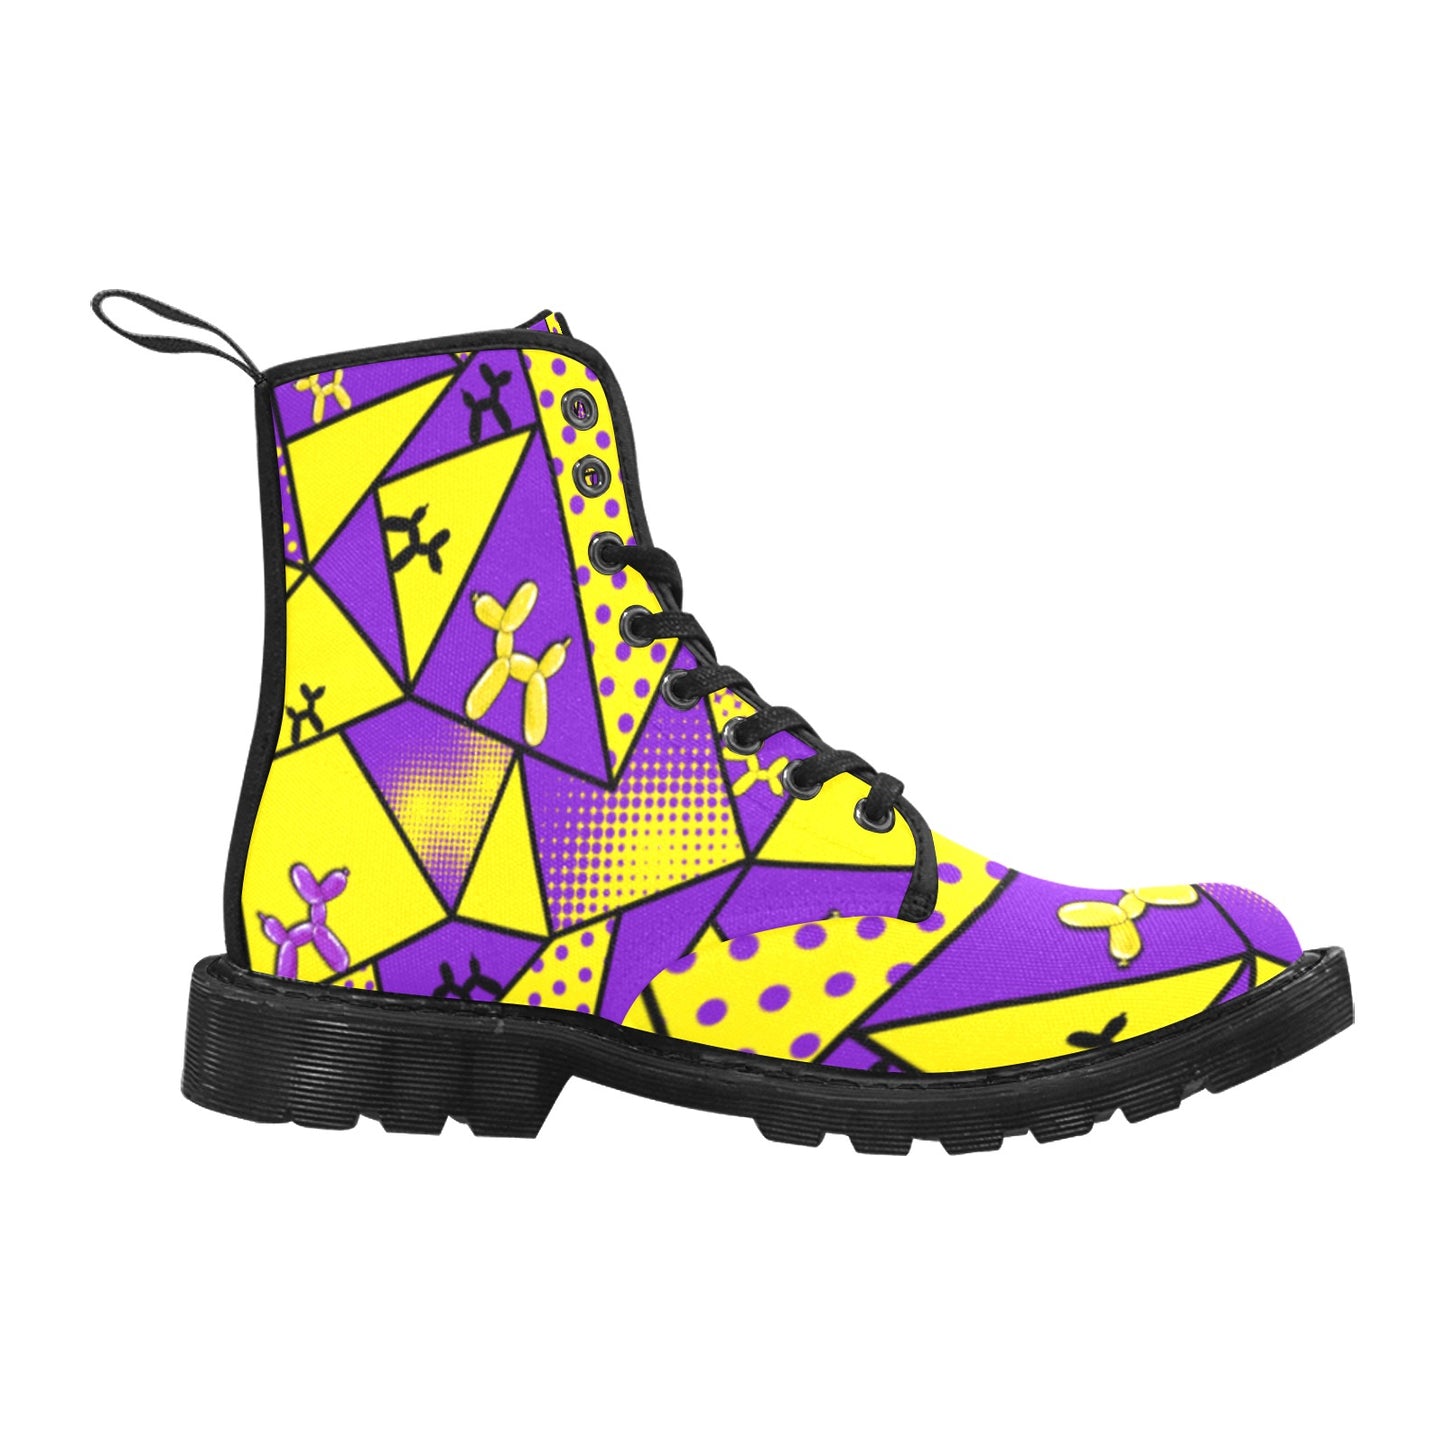 Unique and fun boots for clowns, face painters, and balloon twisters